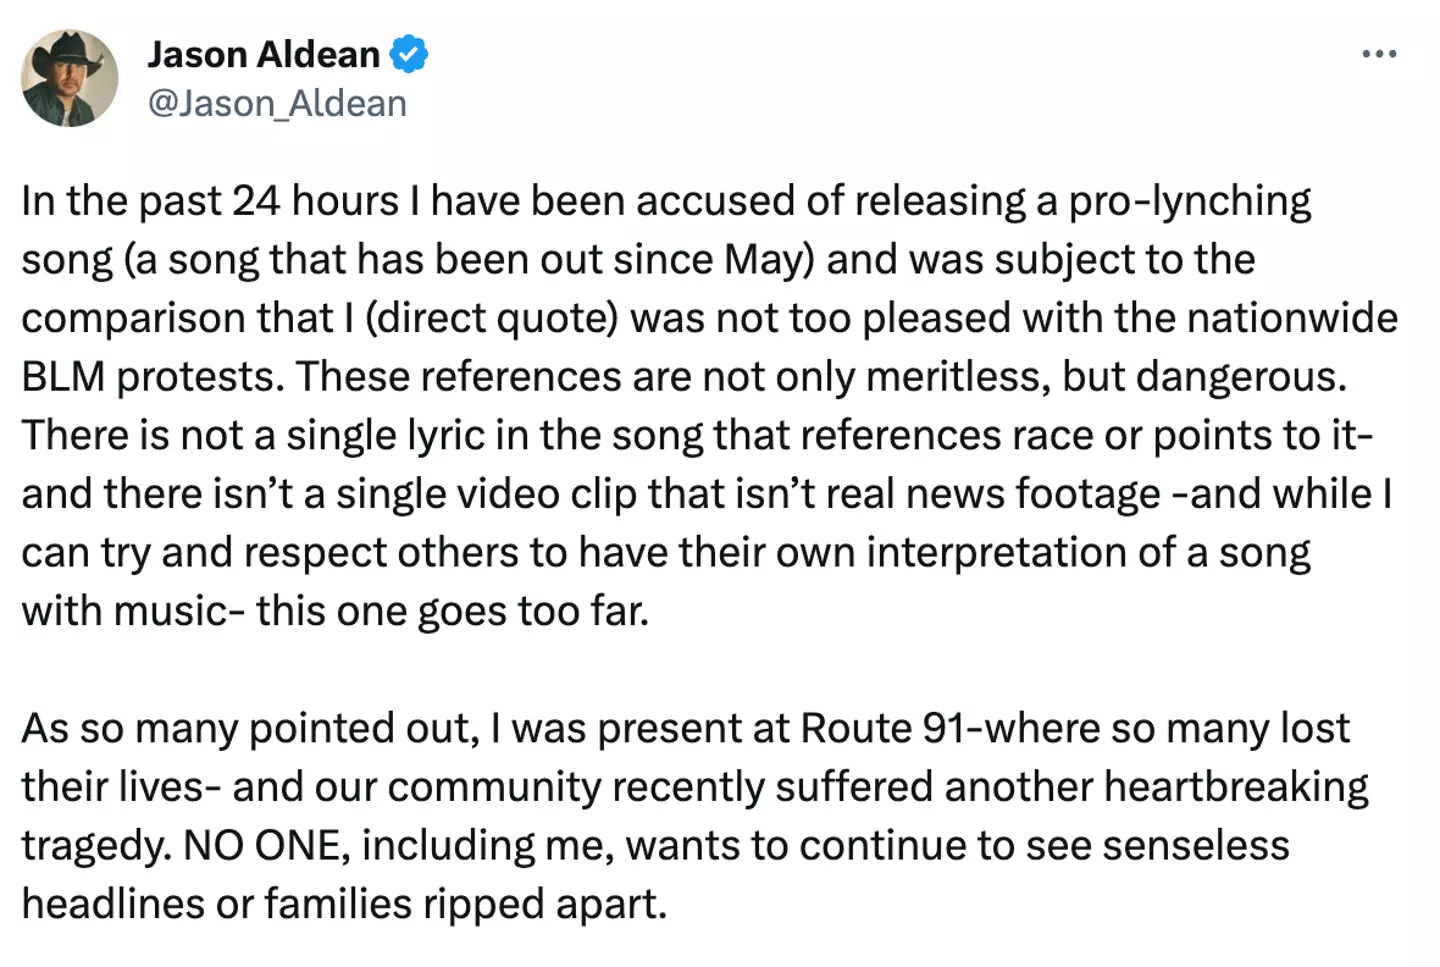 Jason Aldean has denied the allegations about his song.